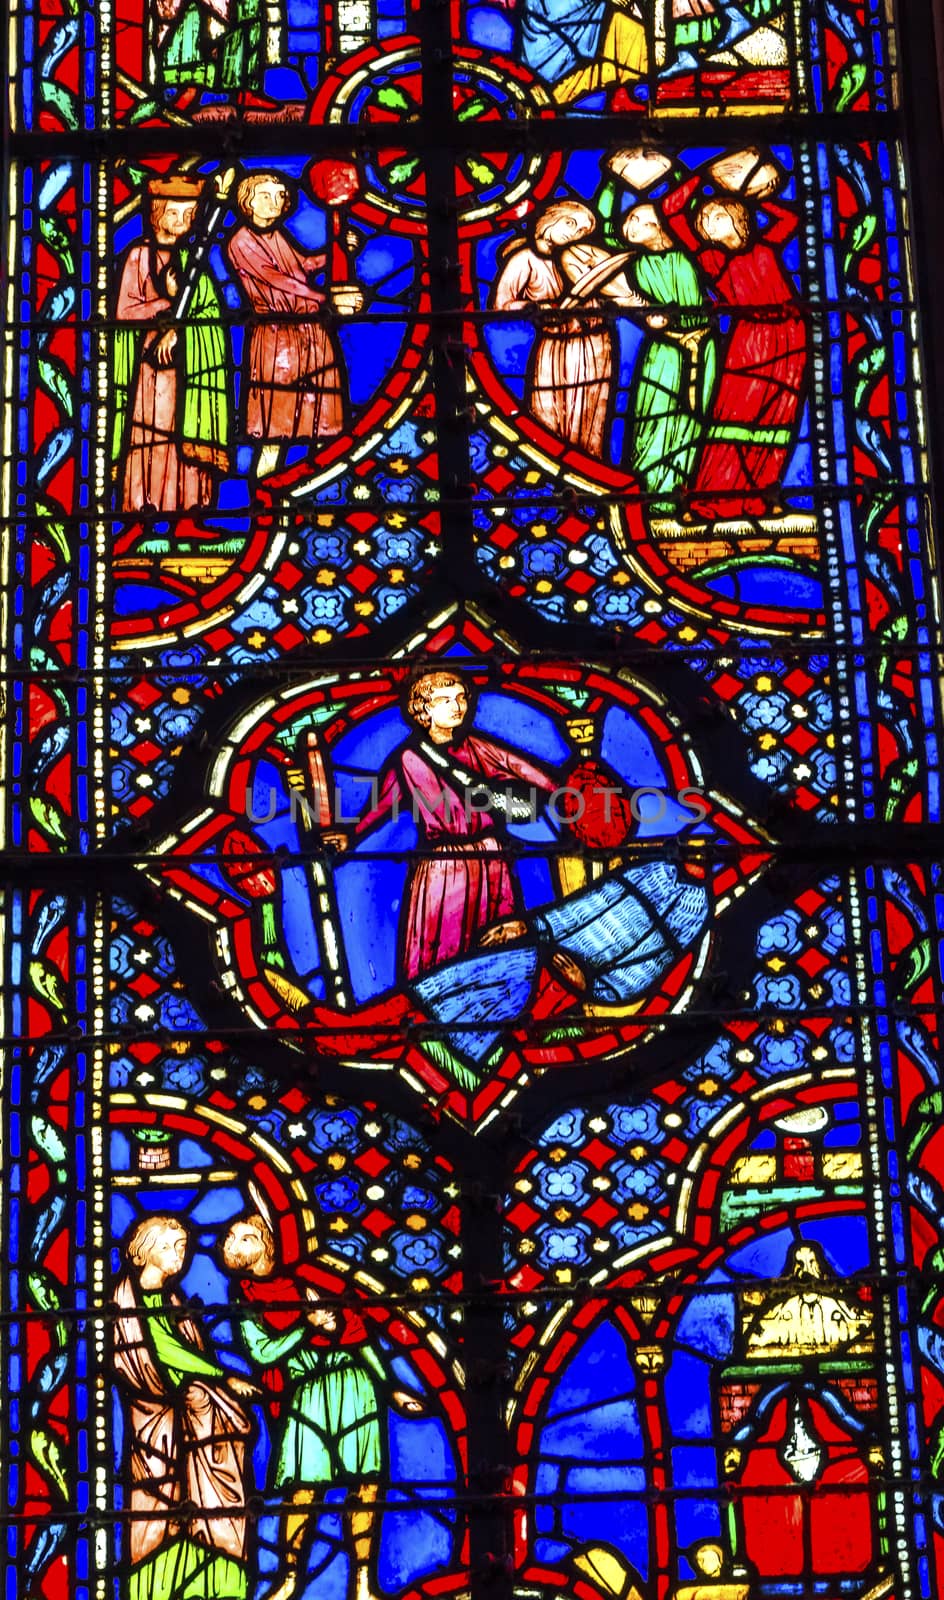 Knights Beheading Medieval Life Stained Glass Saint Chapelle Paris France.  Saint King Louis 9th created Sainte Chapelle in 1248 to house Christian relics, including Christ's Crown of Thorns.  Stained Glass created in the 13th Century and shows various biblical stories along with stories from 1200s.